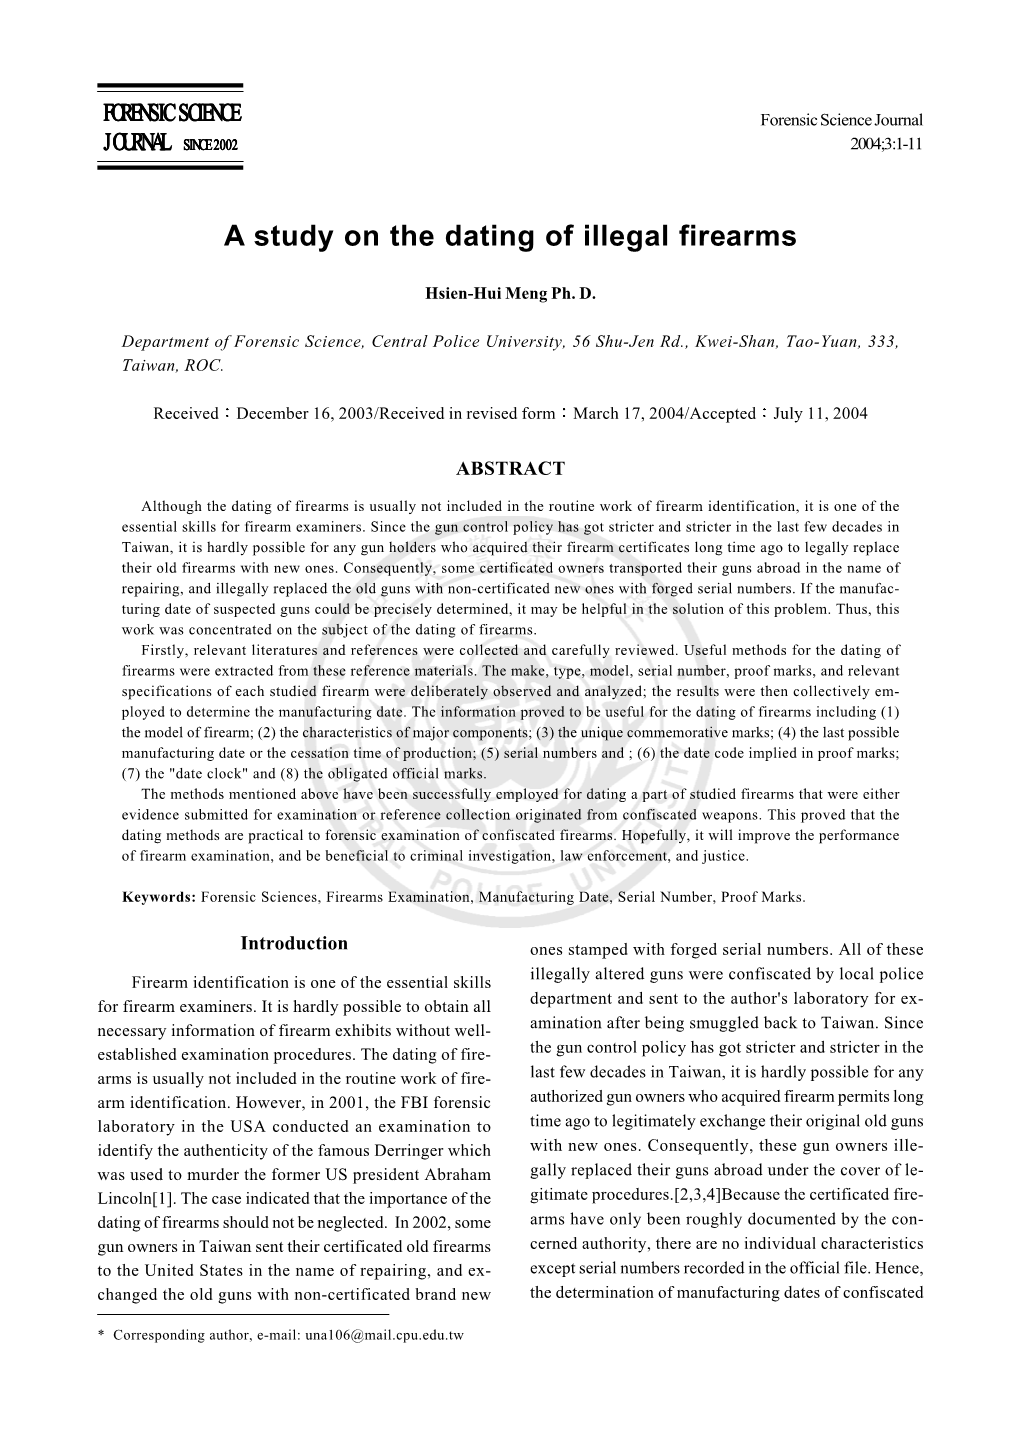 A Study on the Dating of Illegal Firearms